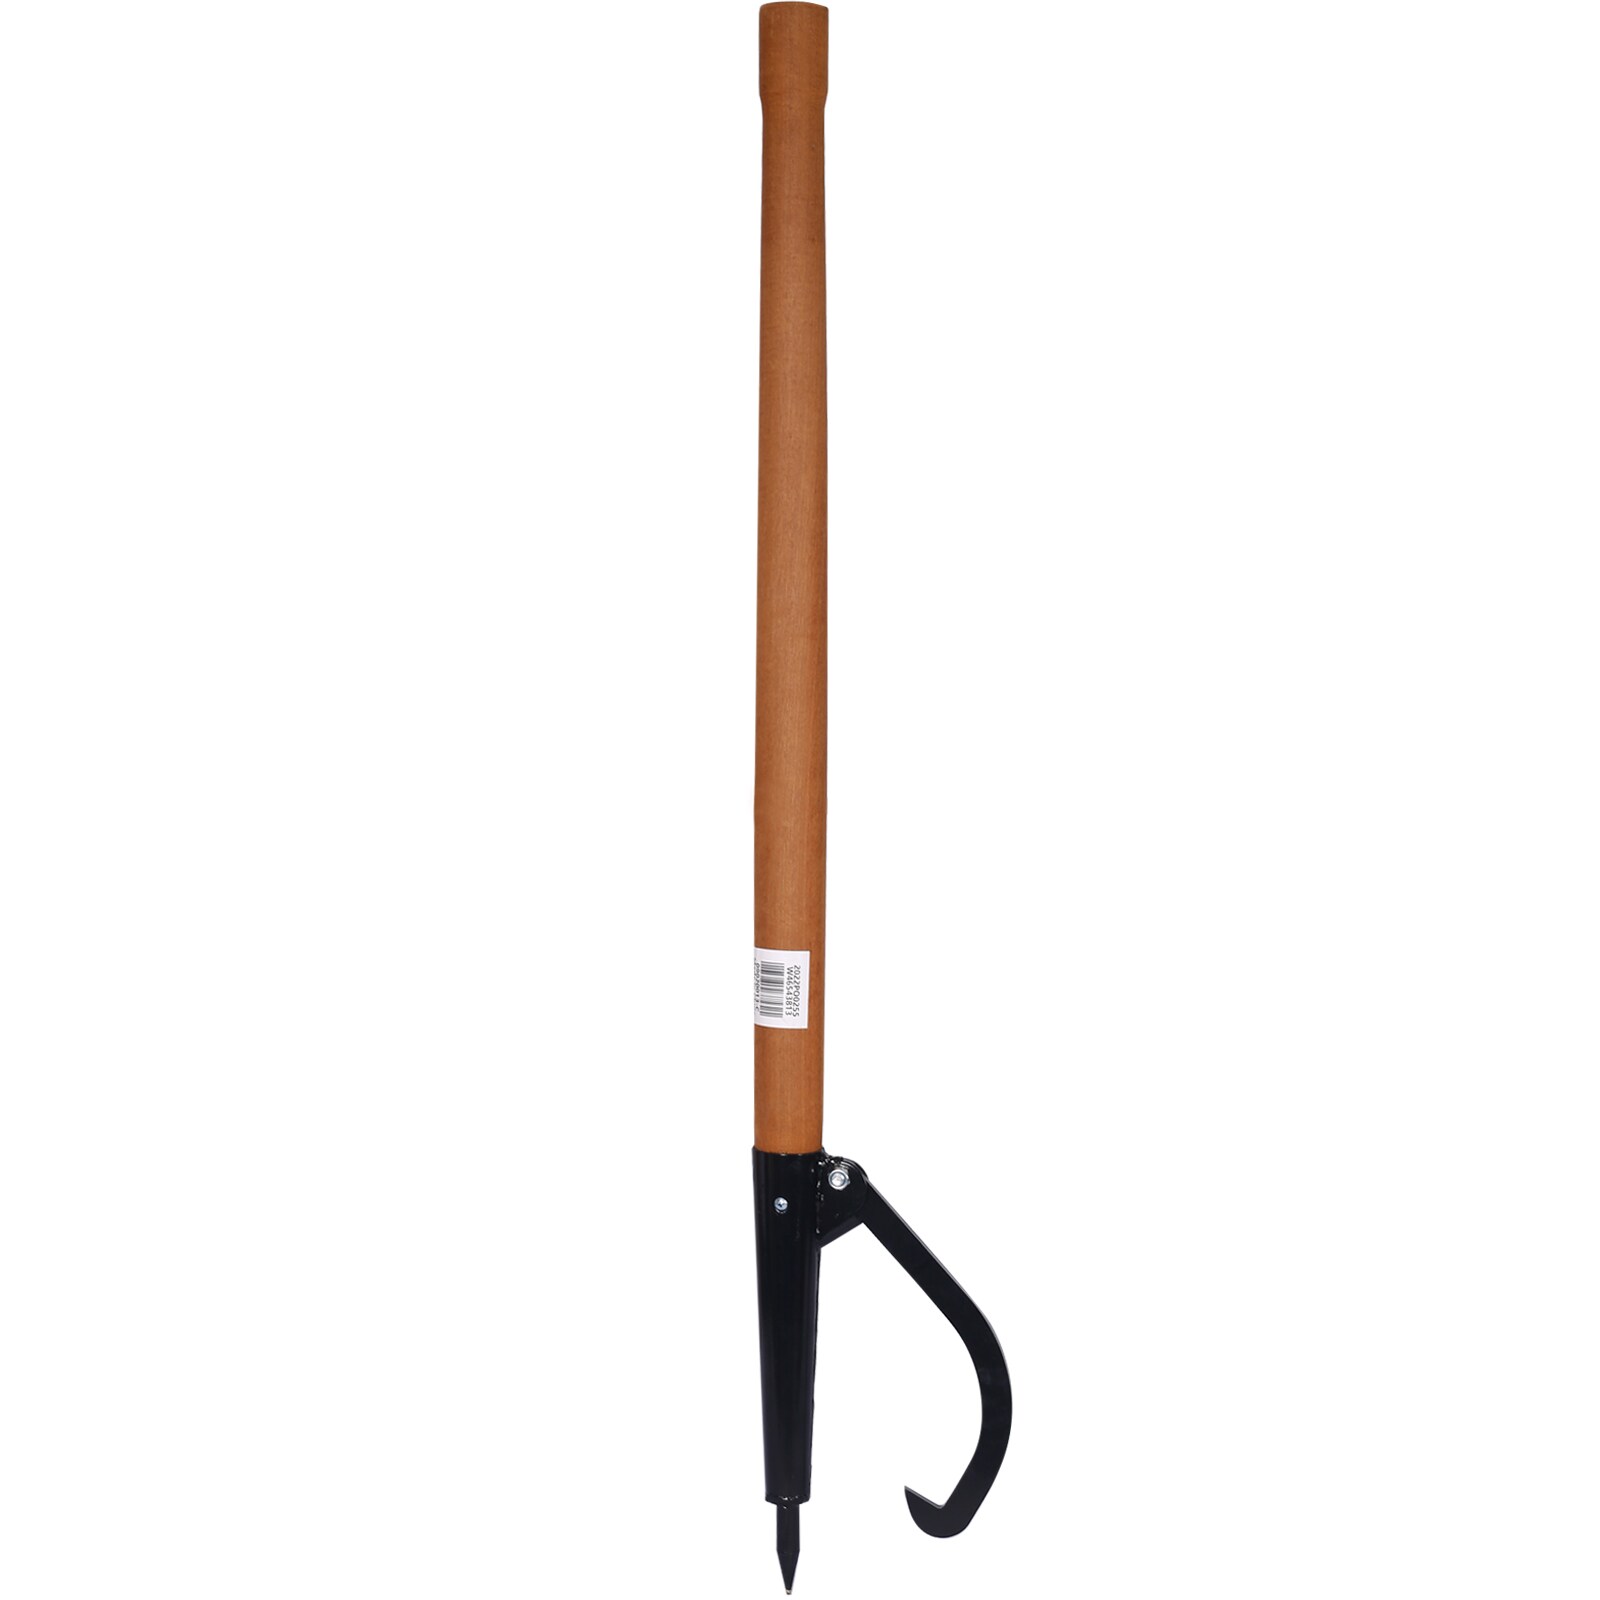 AHIOU HOME 18-Inch Carbon Steel Log Hook with Wood Handle - Durable and  Versatile Logging Tool for Handling Logs and Cants in the Logging Tools  department at